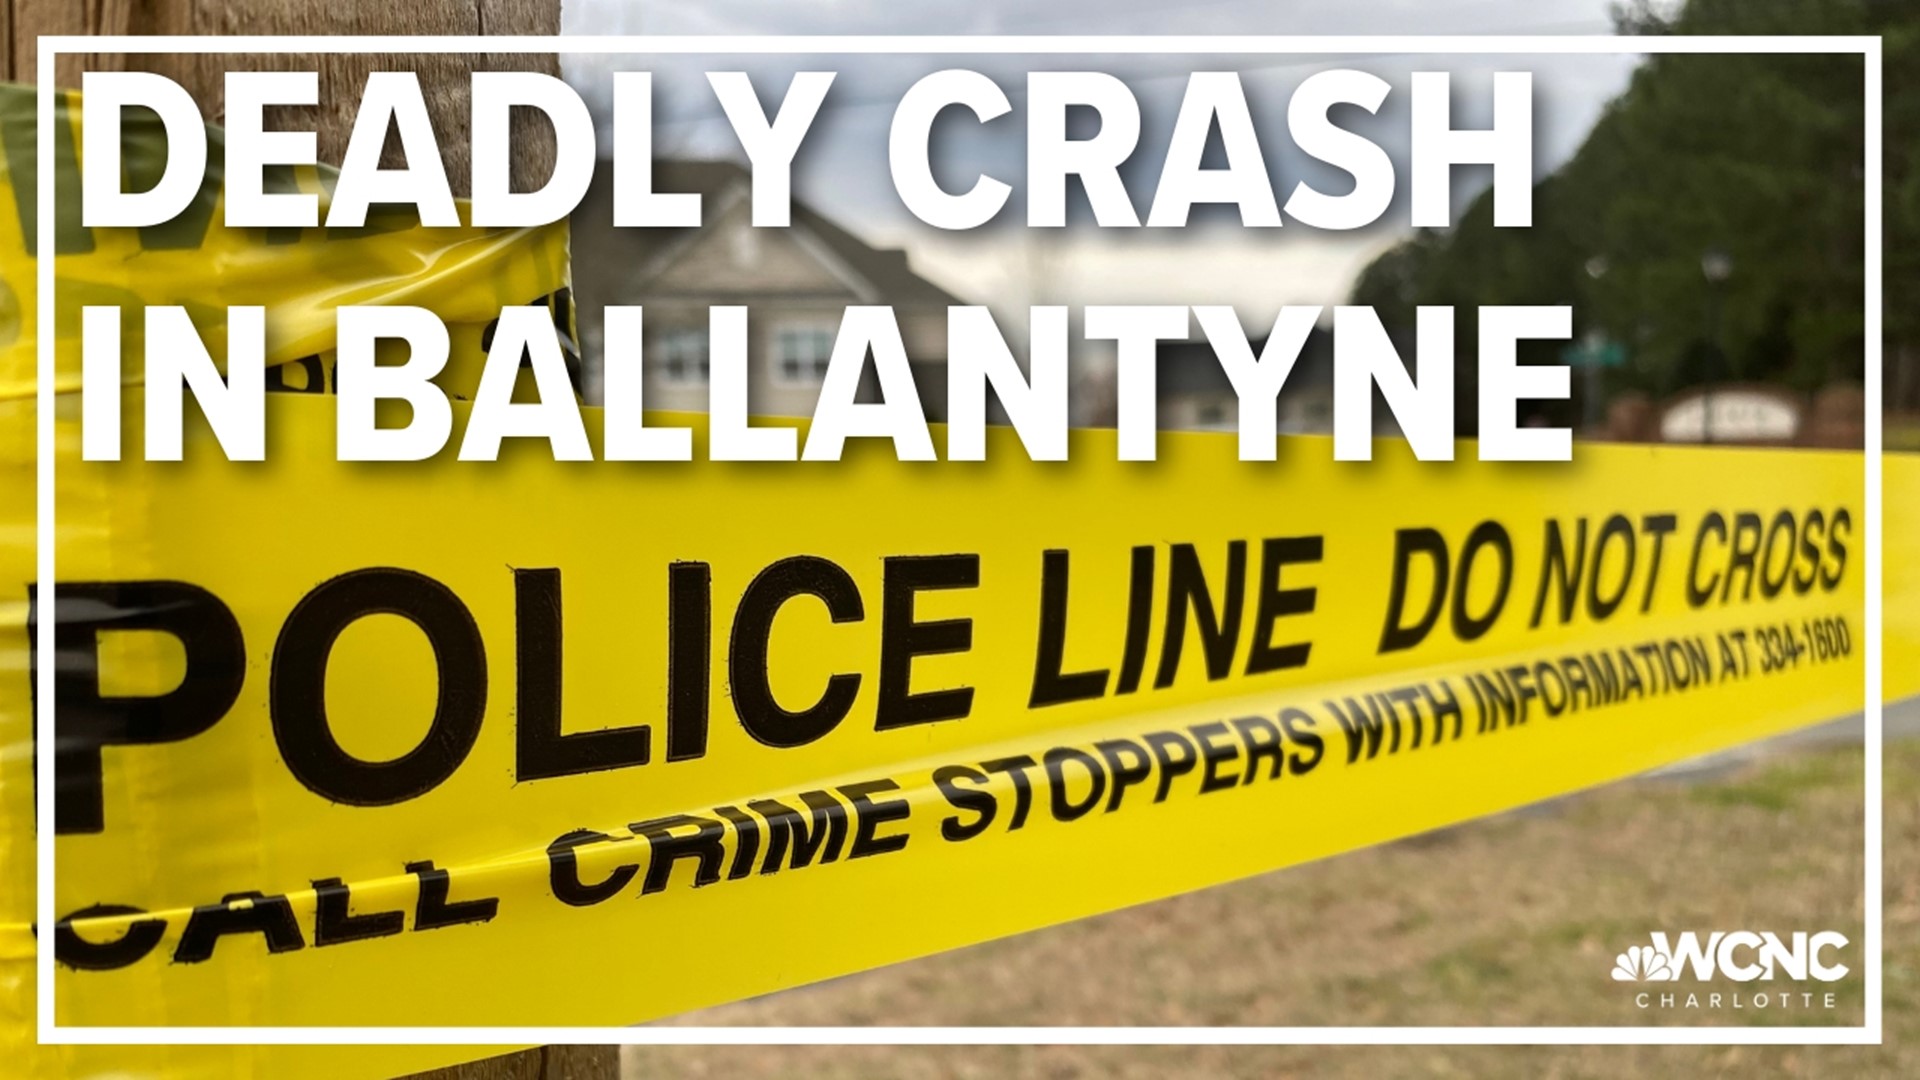 Two people are dead and two others injured when two cars collided head on. The crash happened in Ballanytne.